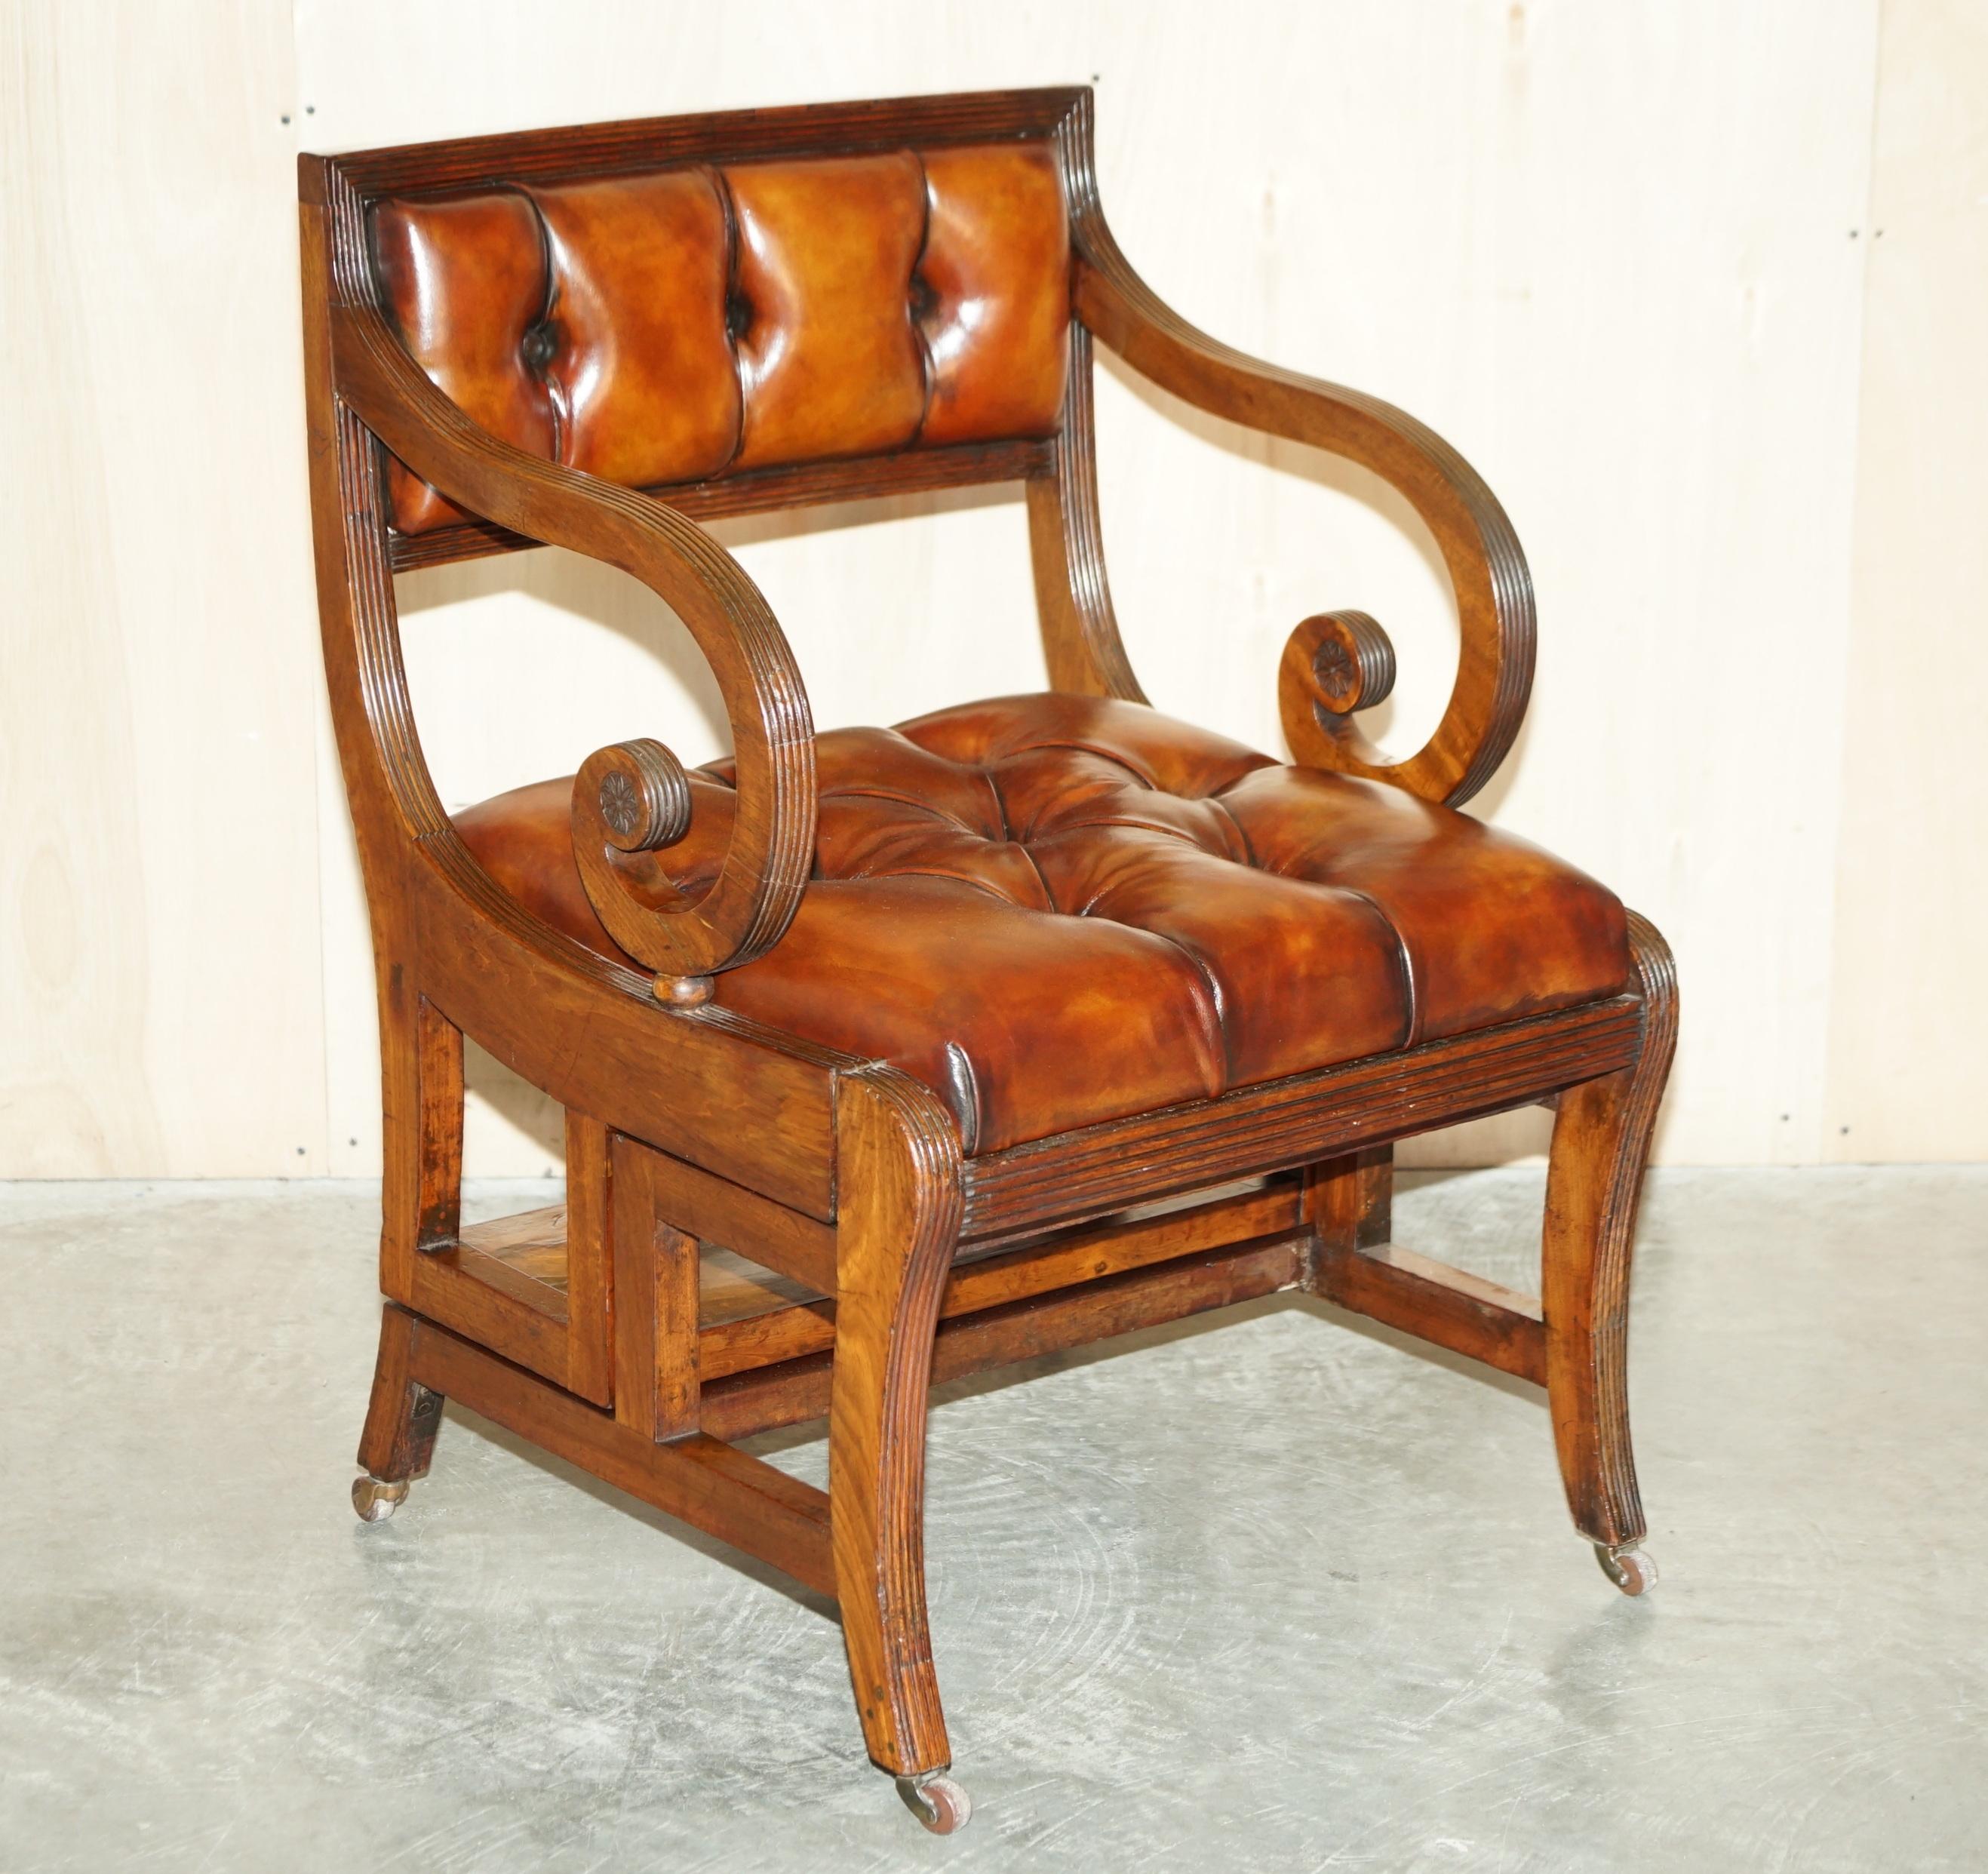 We are delighted to offer for sale this large and collectable fully restored Regency circa 1810-1820 metamorphic armchair which converts into Library steps attributed to Gillows of Lancaster and London

This wonderful piece of English history has